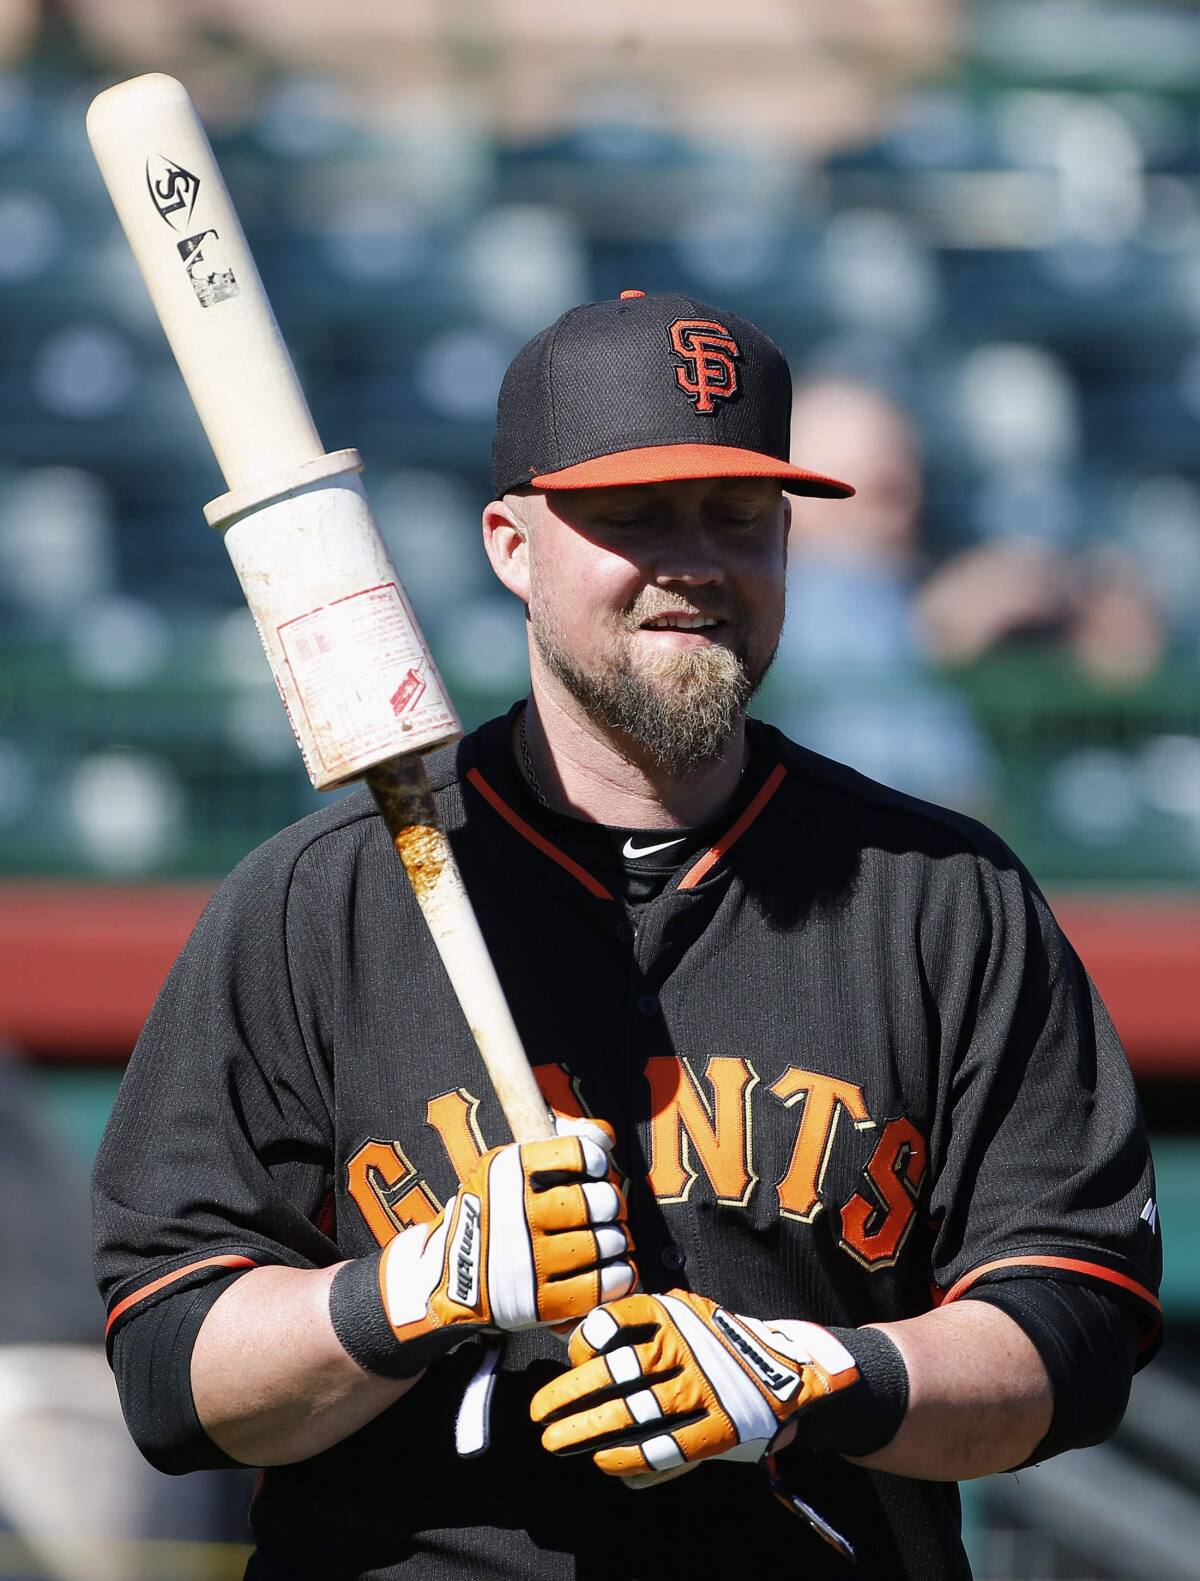 Casey McGehee faces pressure of replacing Sandoval with Giants